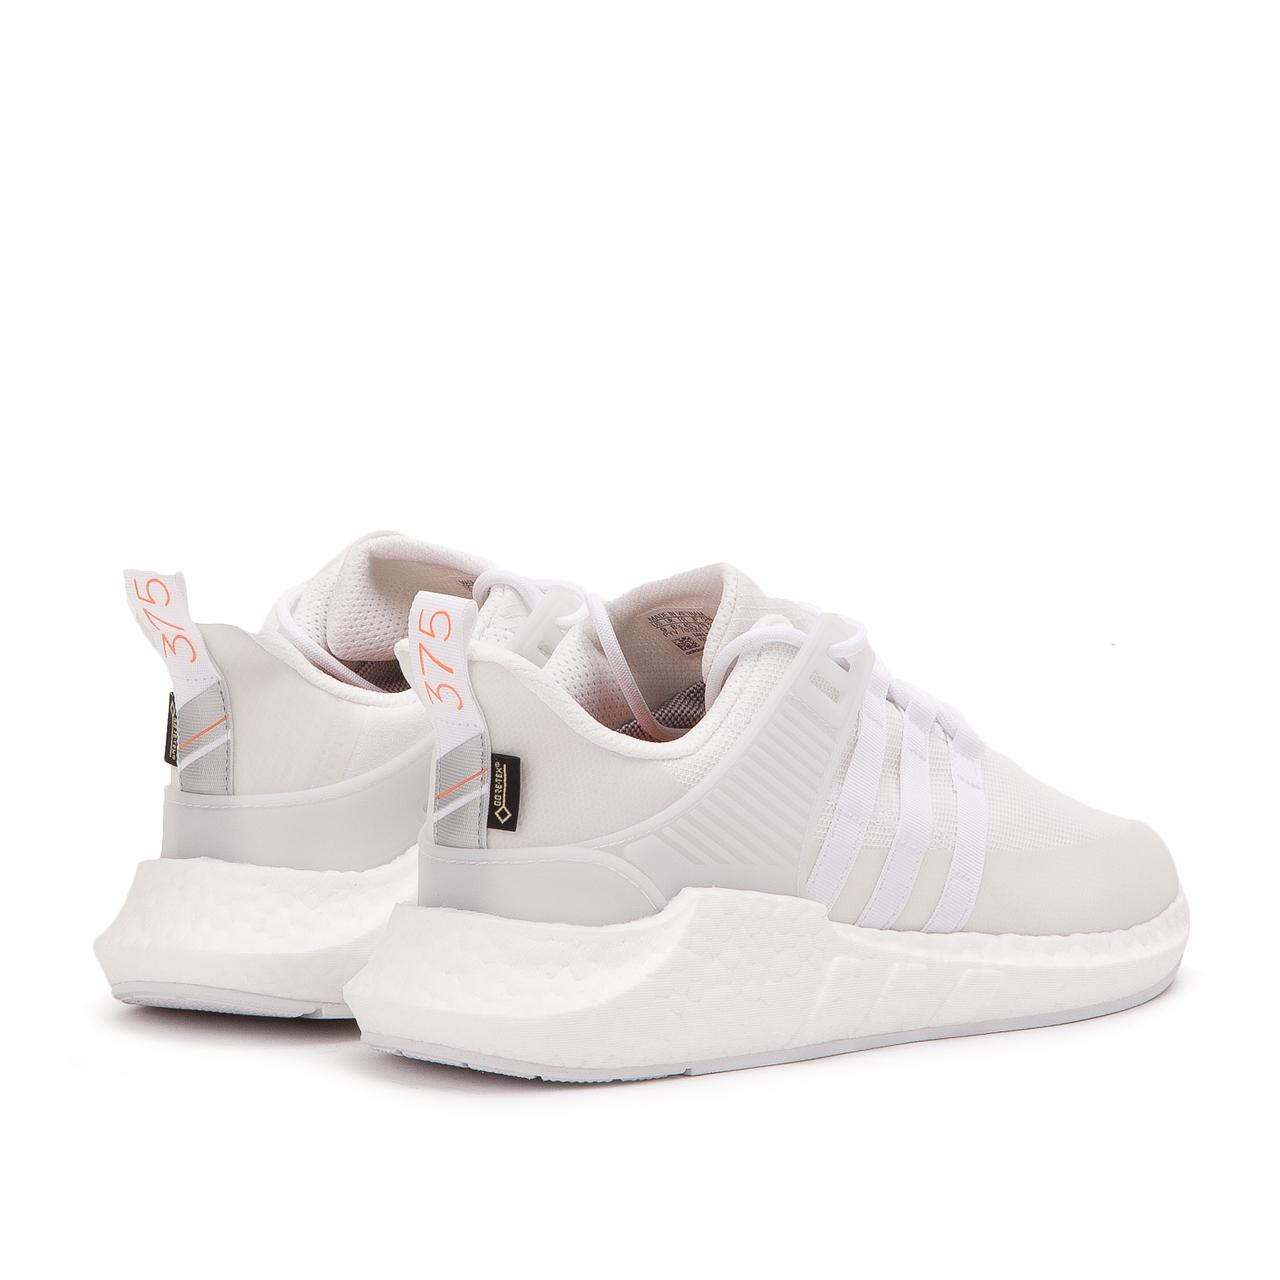 adidas Eqt Support 93/17 Boost Gtx Gore Tex "reflect And Protect" in White  | Lyst